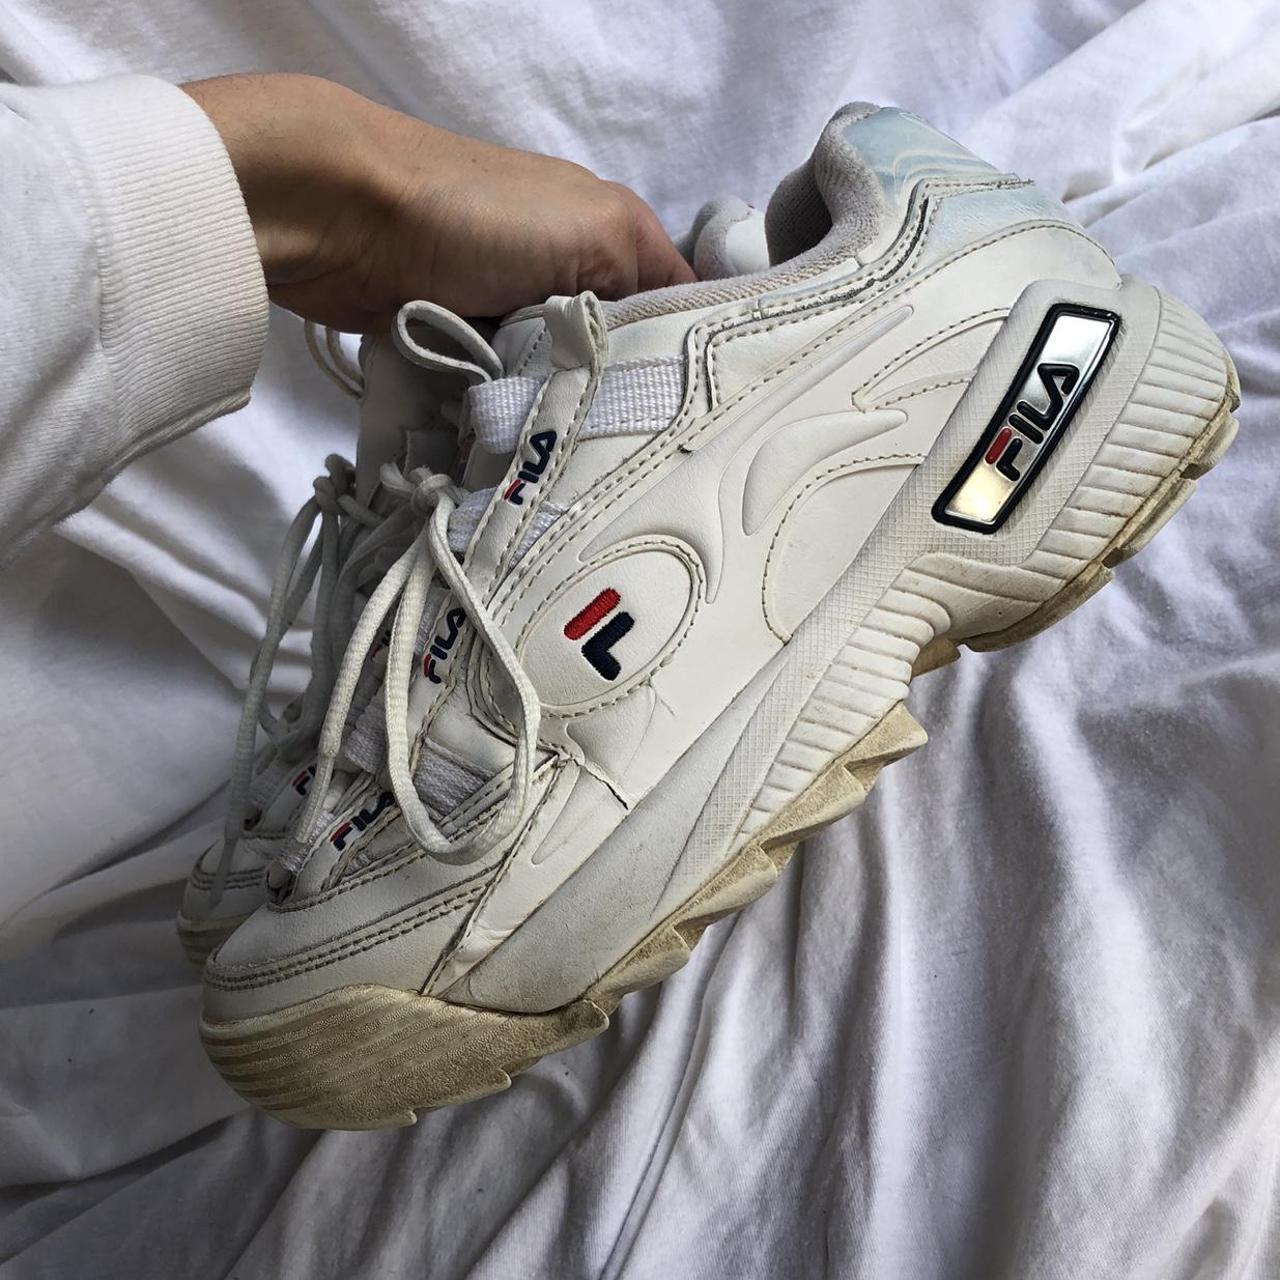 Classic chunky Fila dad sneakers🤍 These are the... - Depop